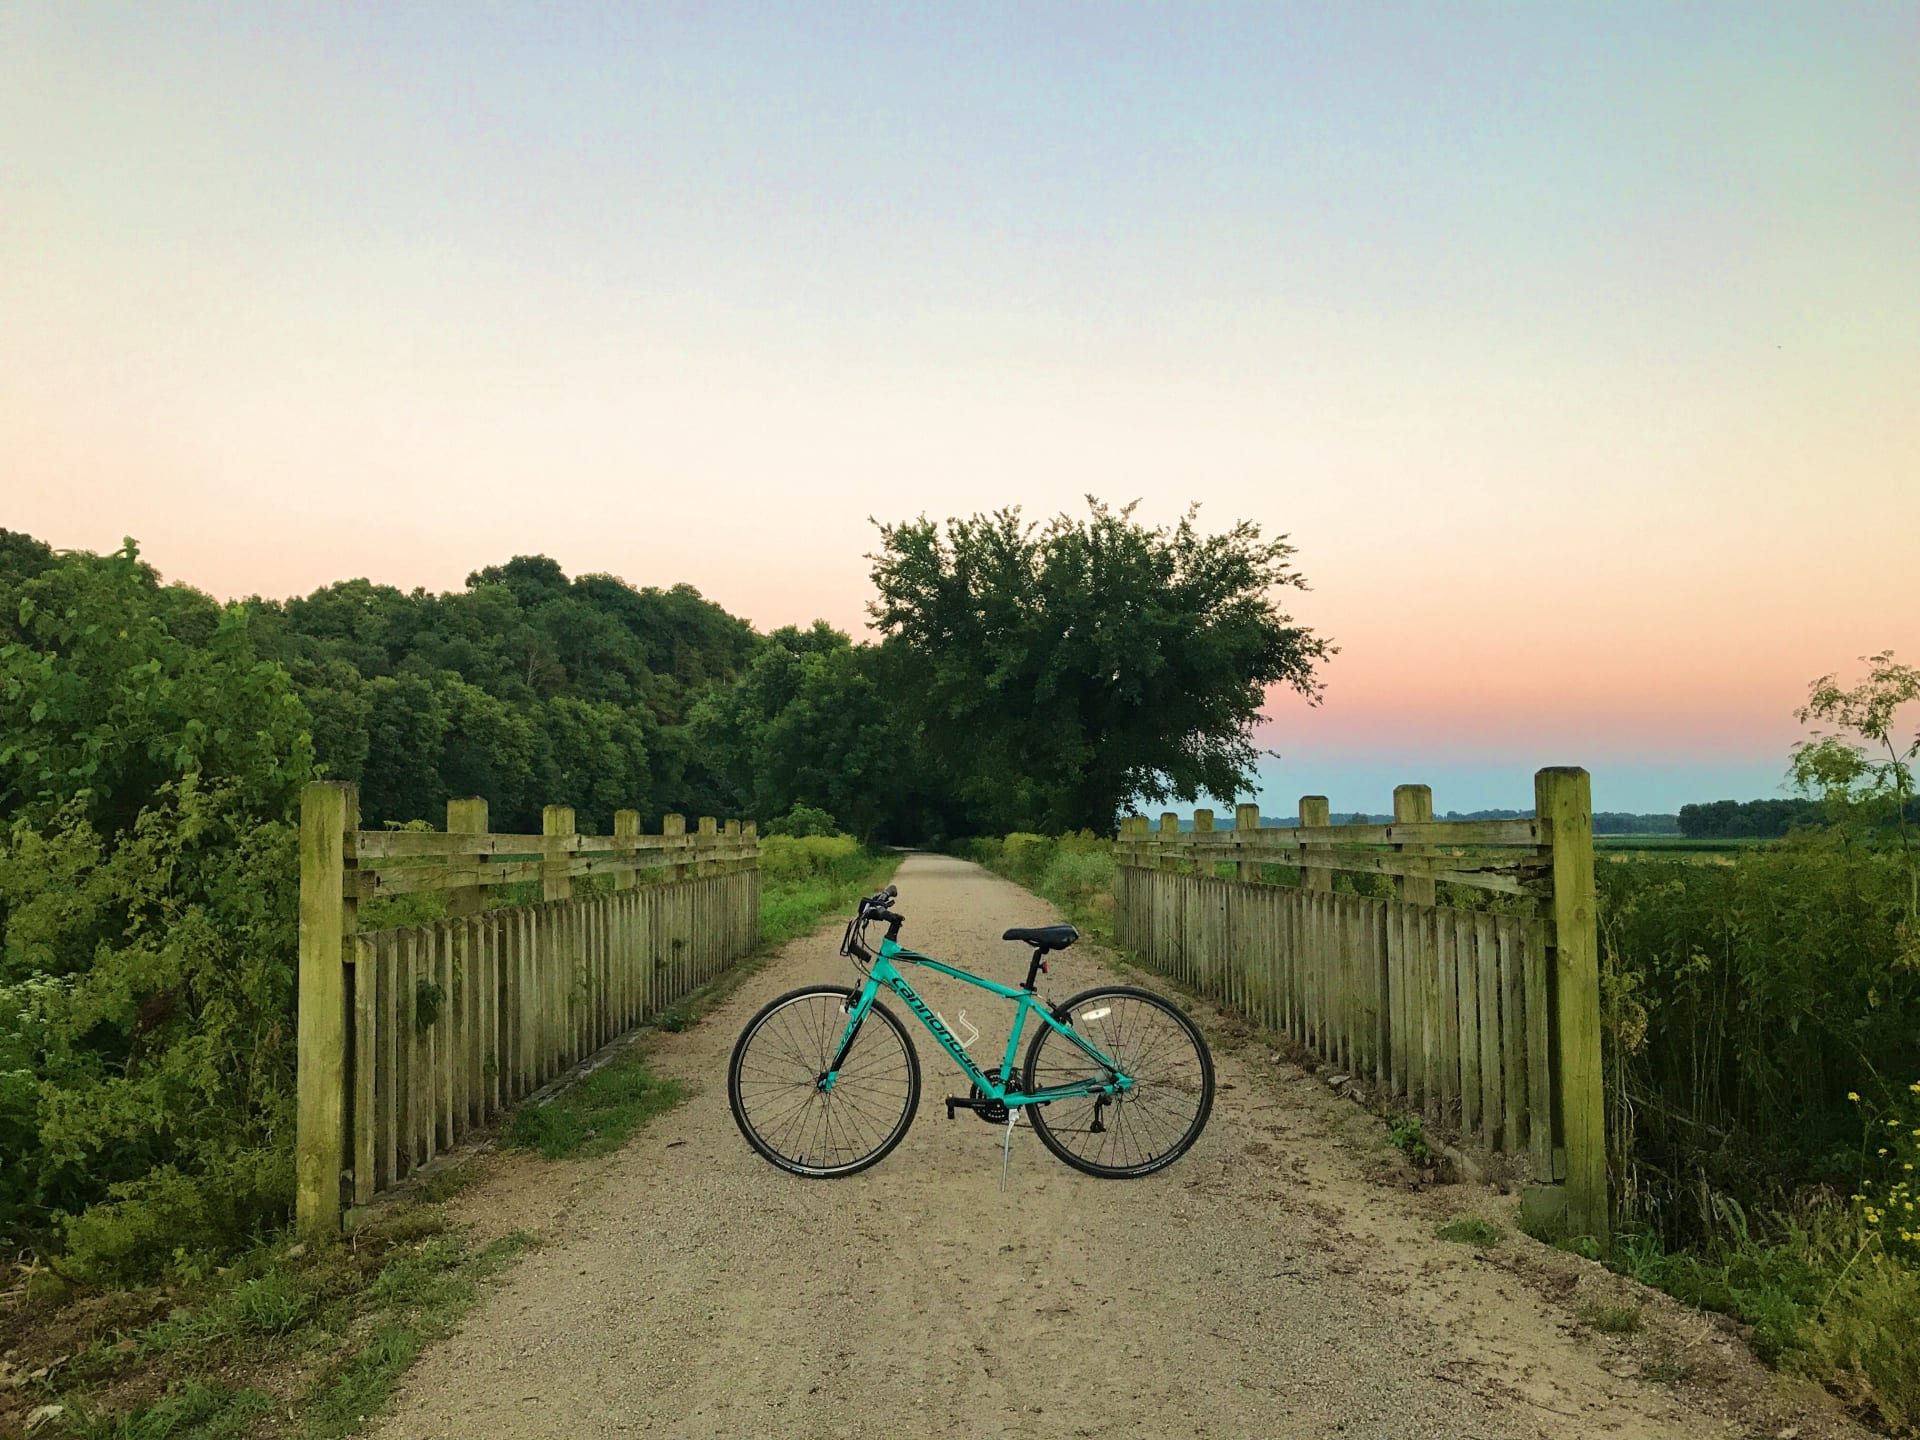 Katy Trail at sunset - bring your bike!